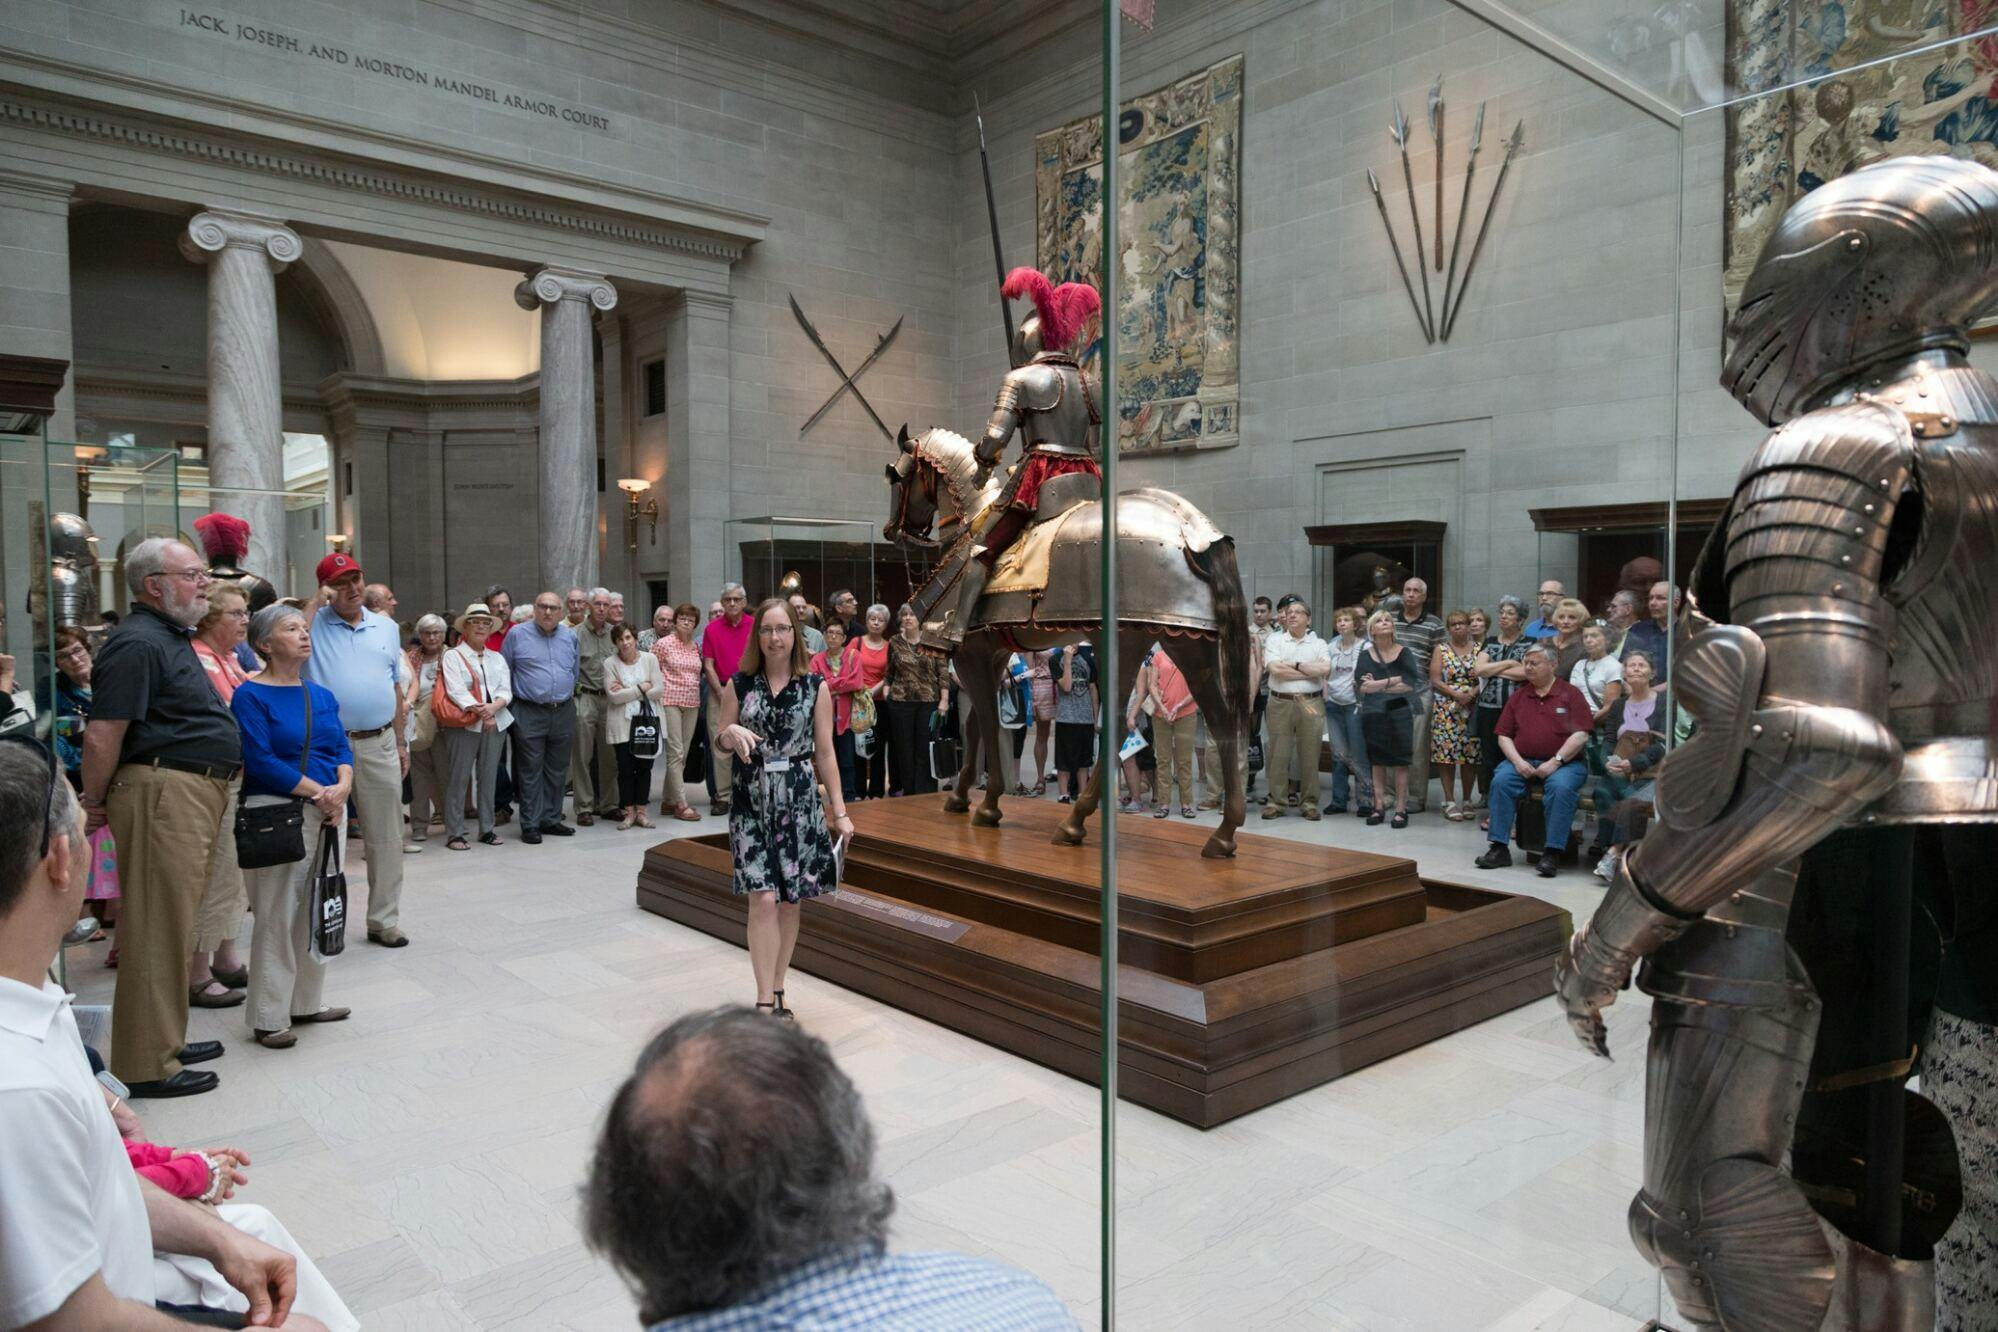 A tour guide leading a group of visitors through the armor court